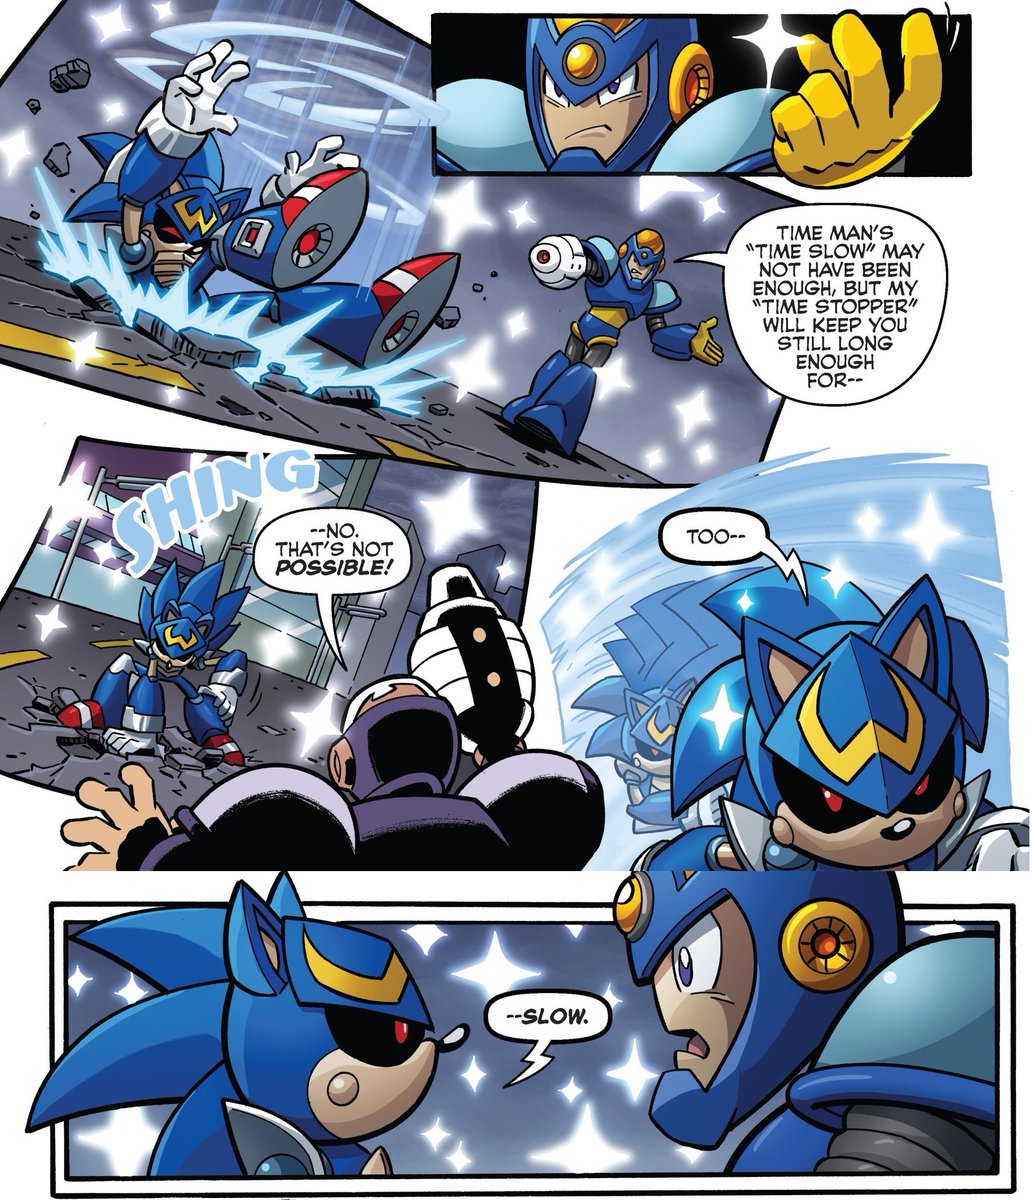 In the Sonic the Hedgehog and Mega Man crossover event Worlds Unite, Sonic Man is able to move through stopped time. 